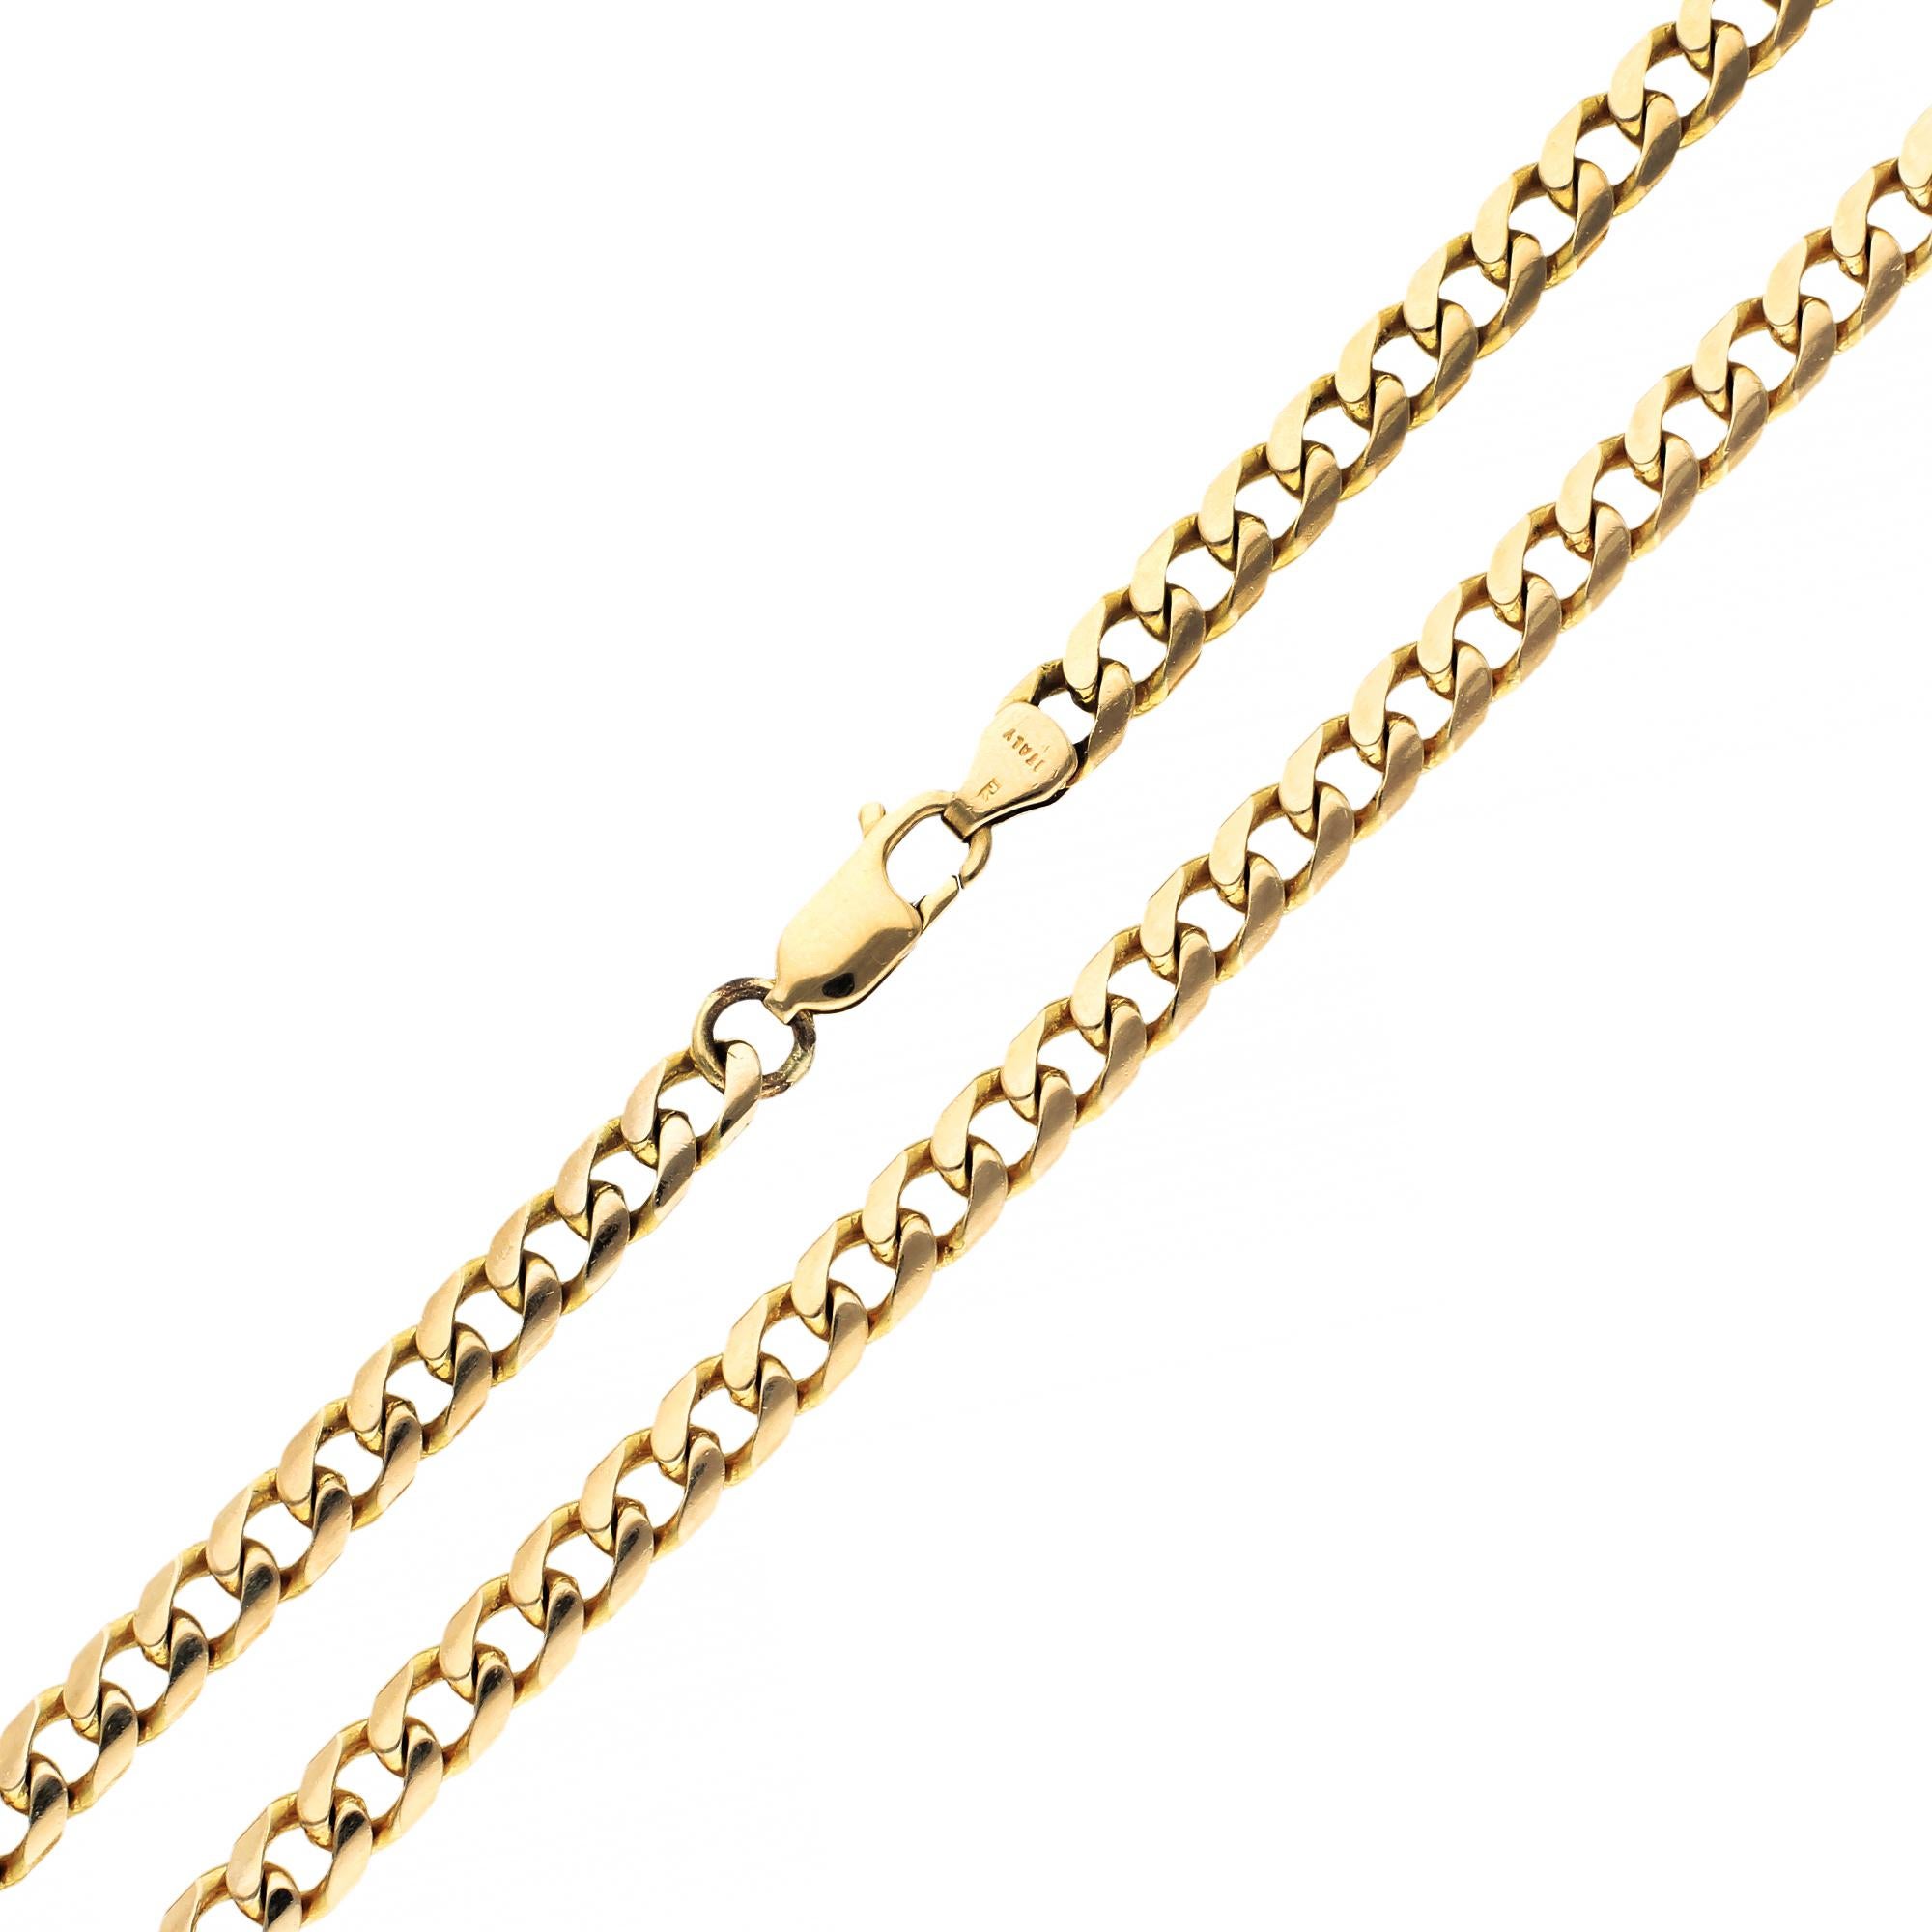  9ct Yellow Gold Filed Curb 22 Inch Chain - 36.4 Grams 

Discover the timeless appeal of this handsome pre-owned filed curb chain, meticulously crafted from 9ct yellow gold. This substantial piece is as durable as it is beautiful, making it a